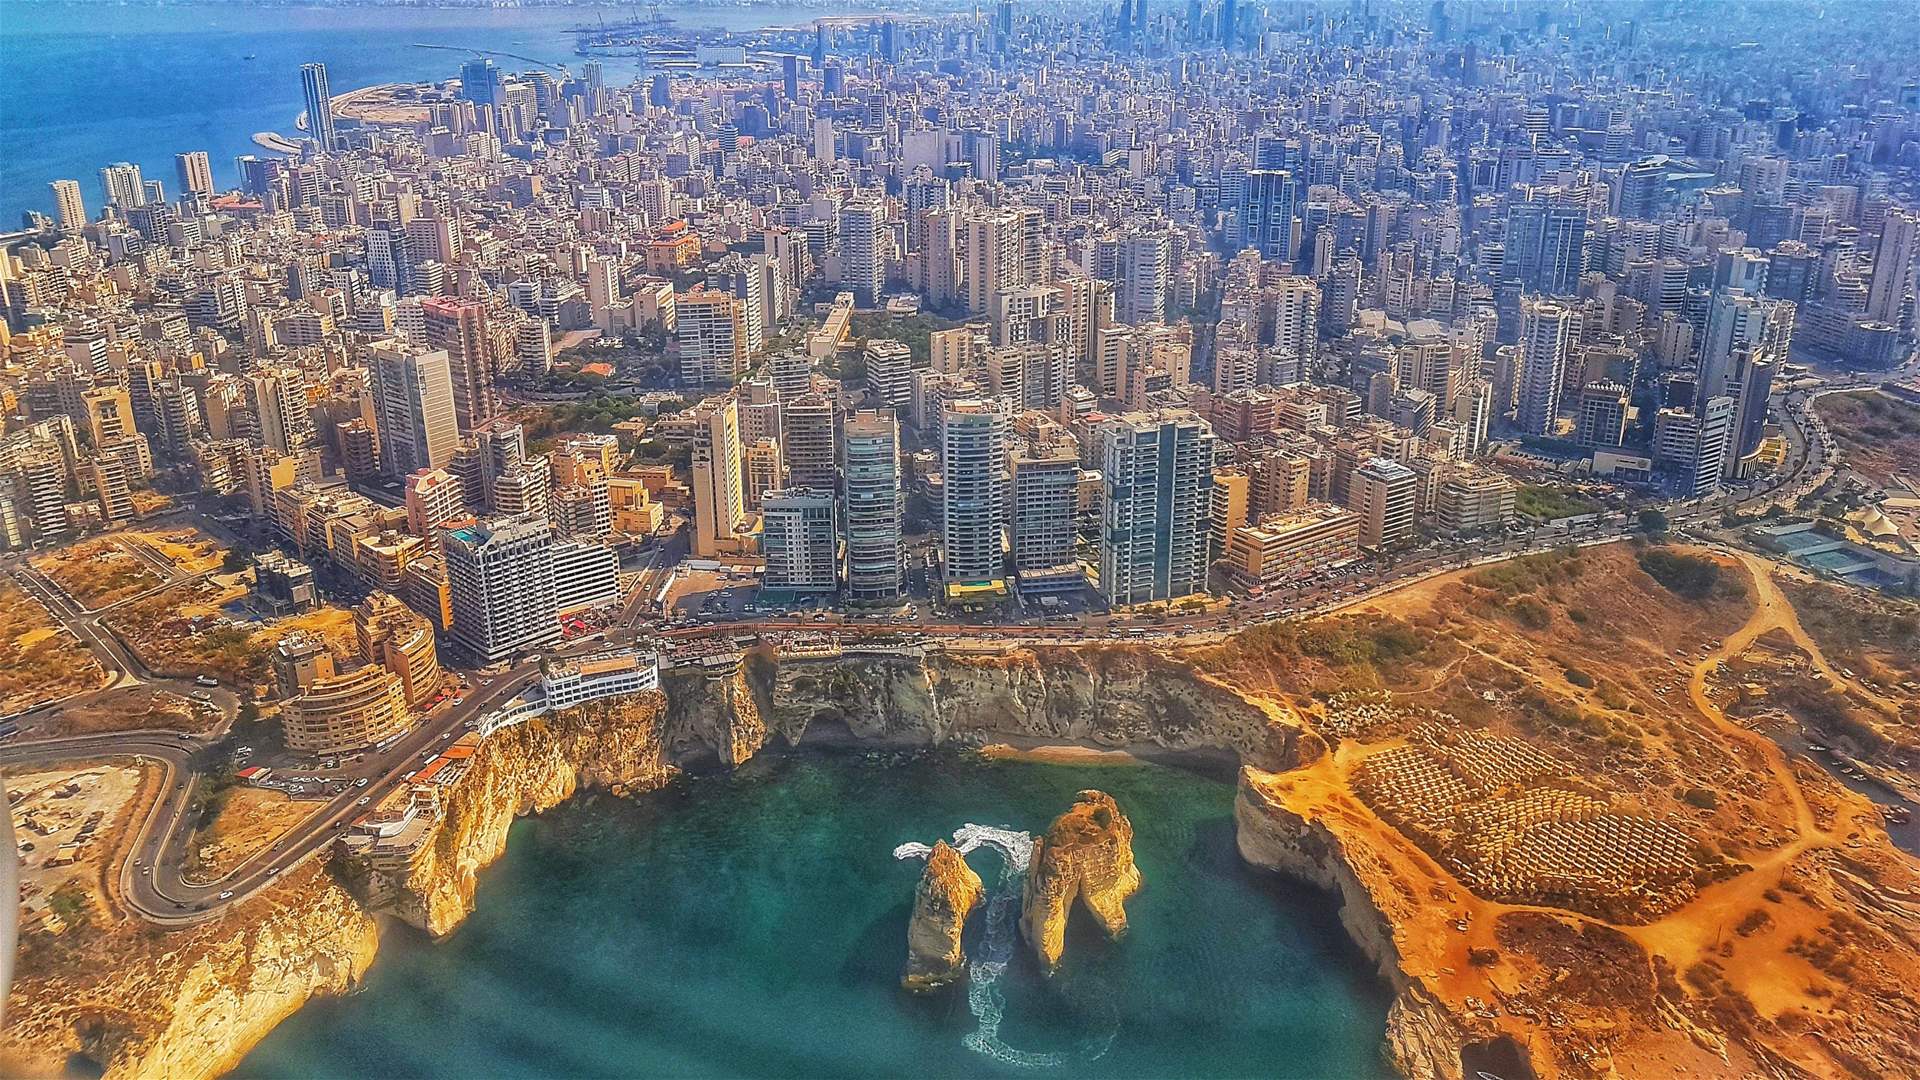 Beirut hotels reached 49.6 percent occupancy rate in 2022